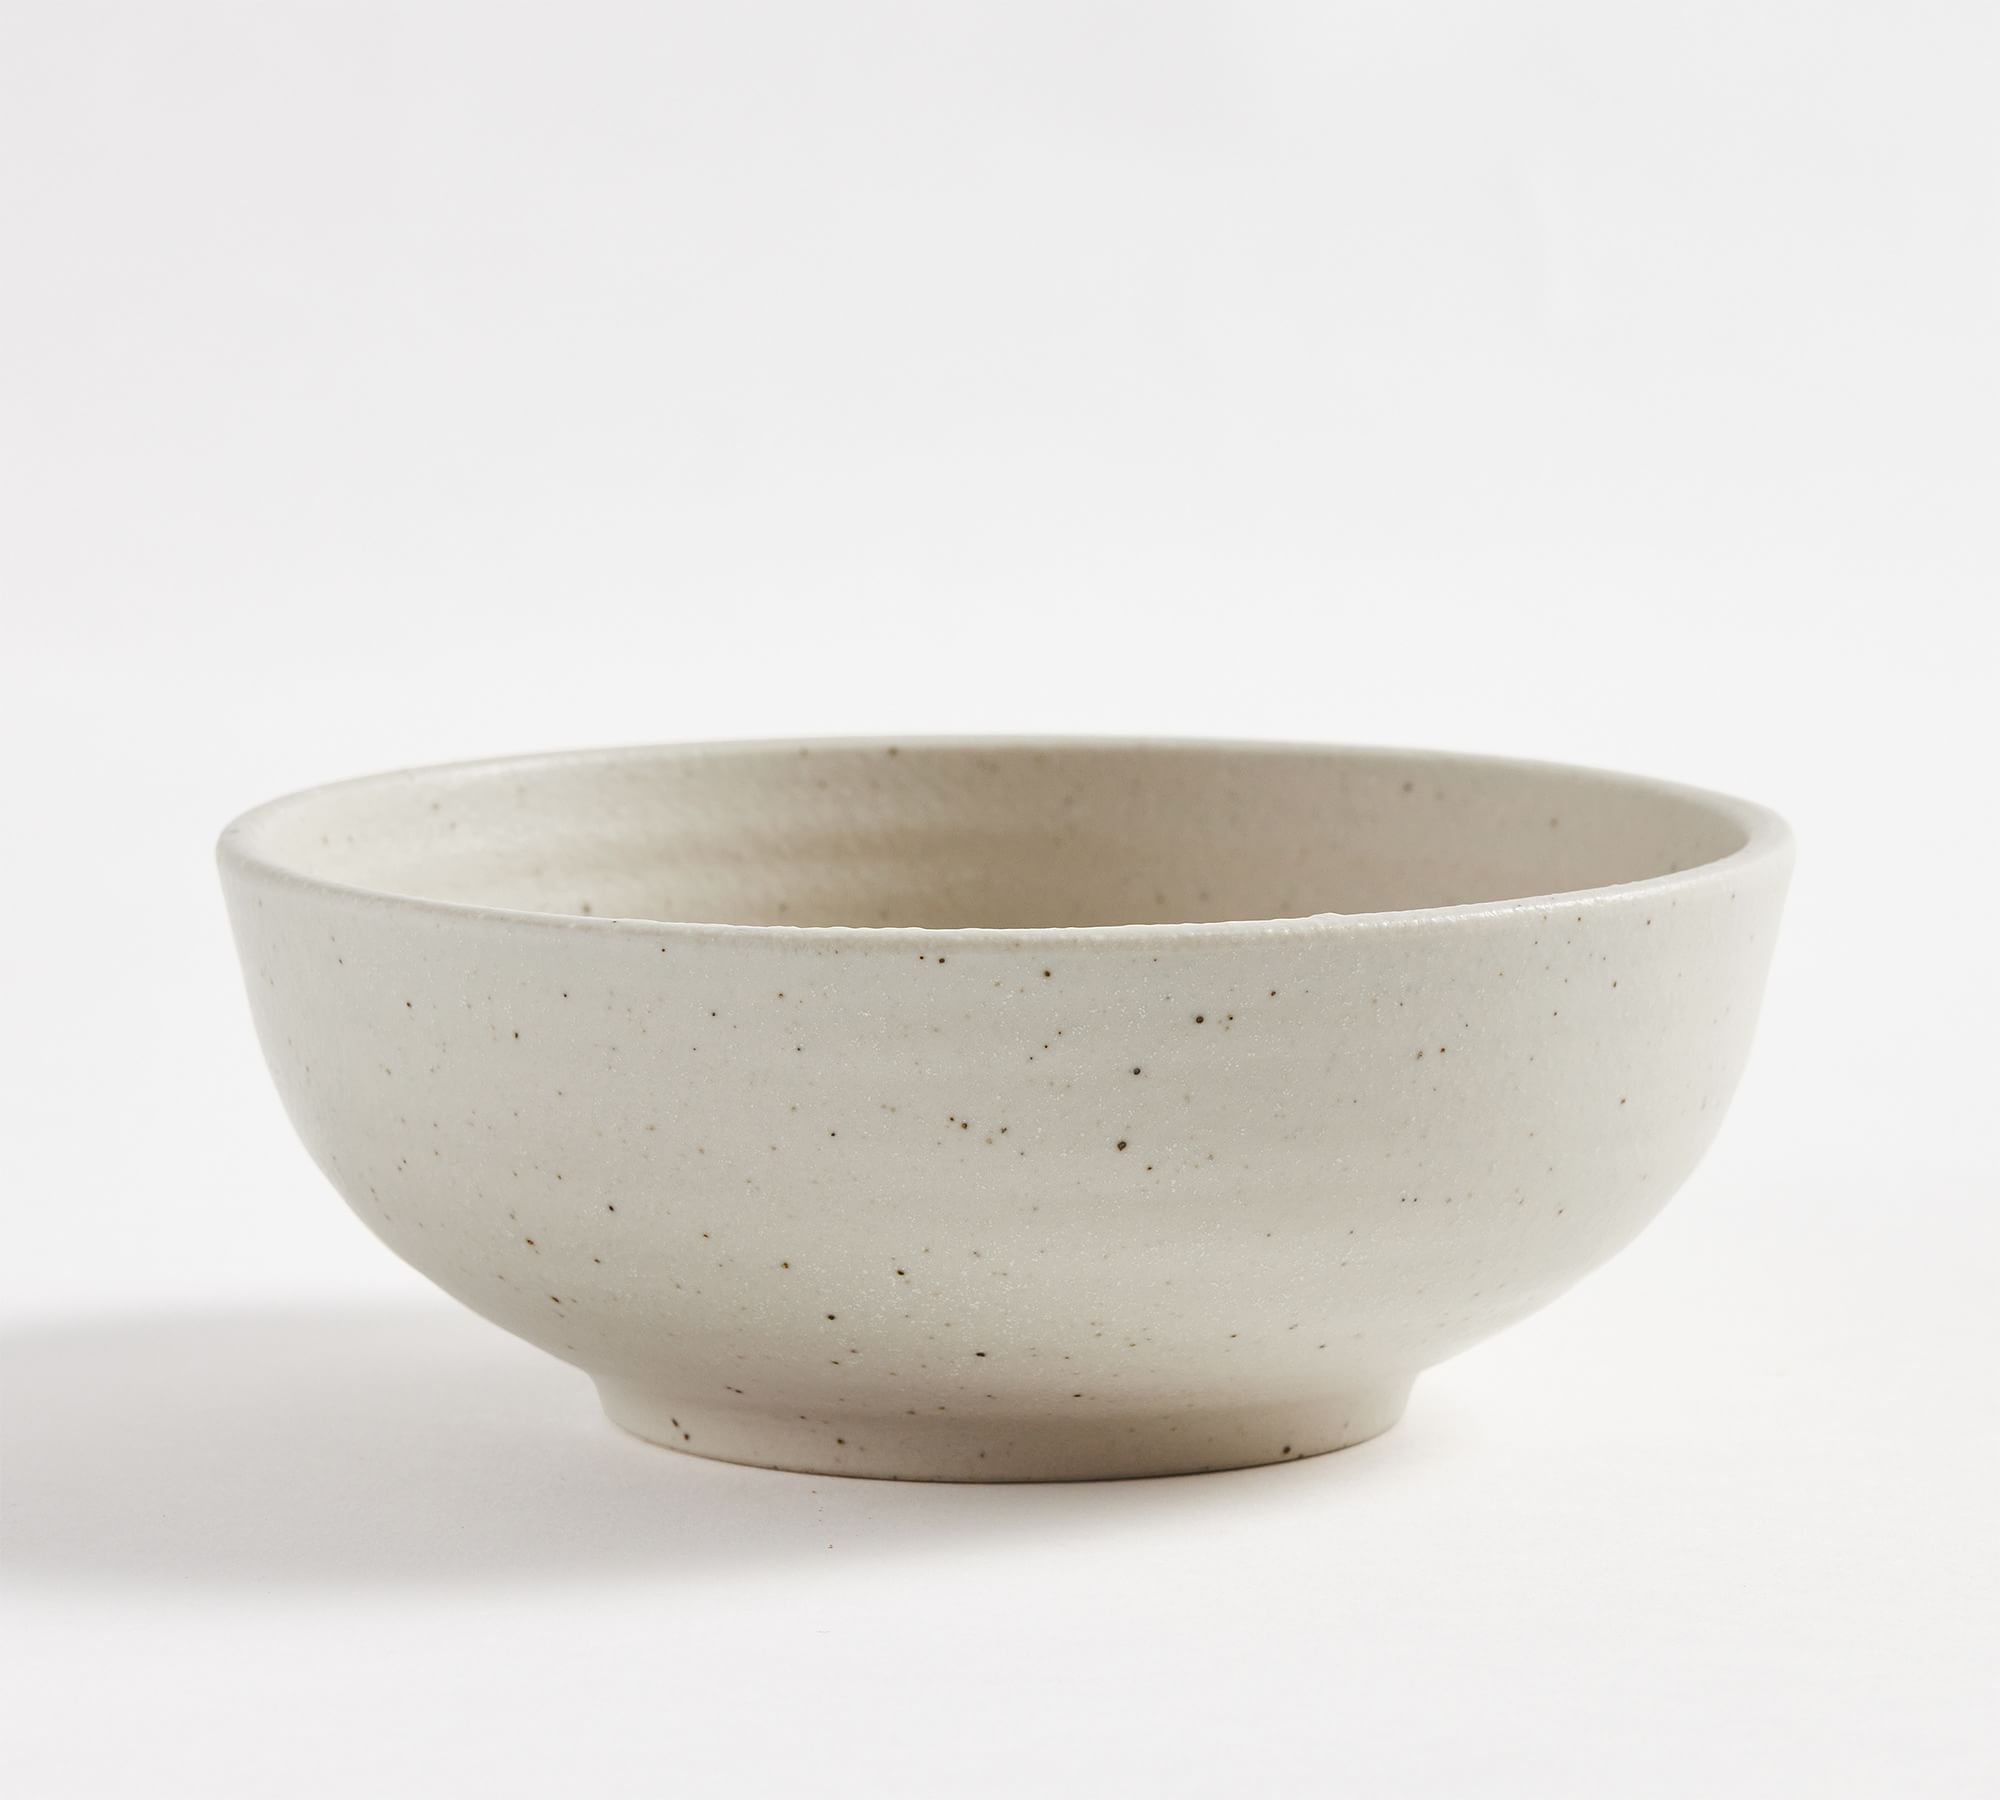 Farmstead Stoneware Cereal Bowls